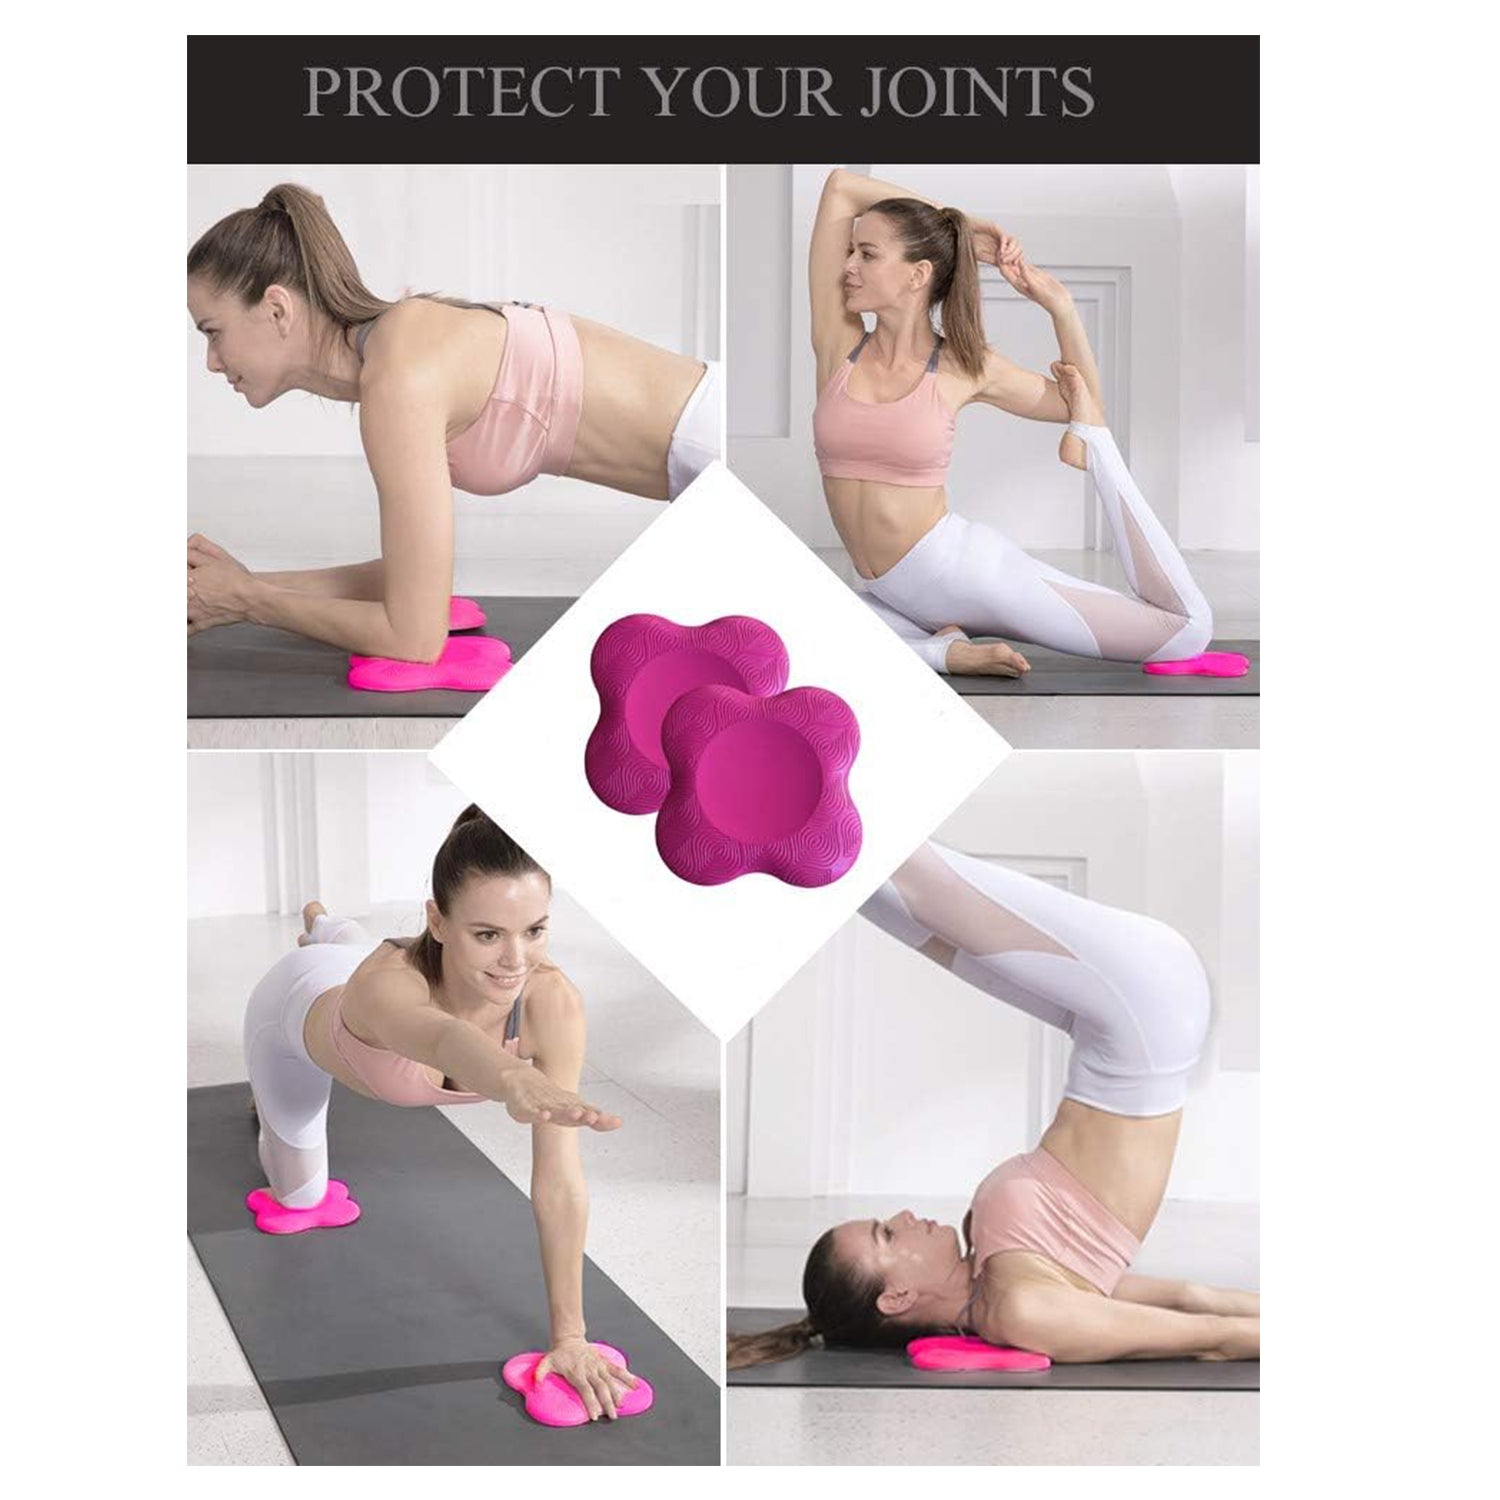 Yoga Pad for Knees - Yoga Knee Pads Cusion support for Knee Wrist